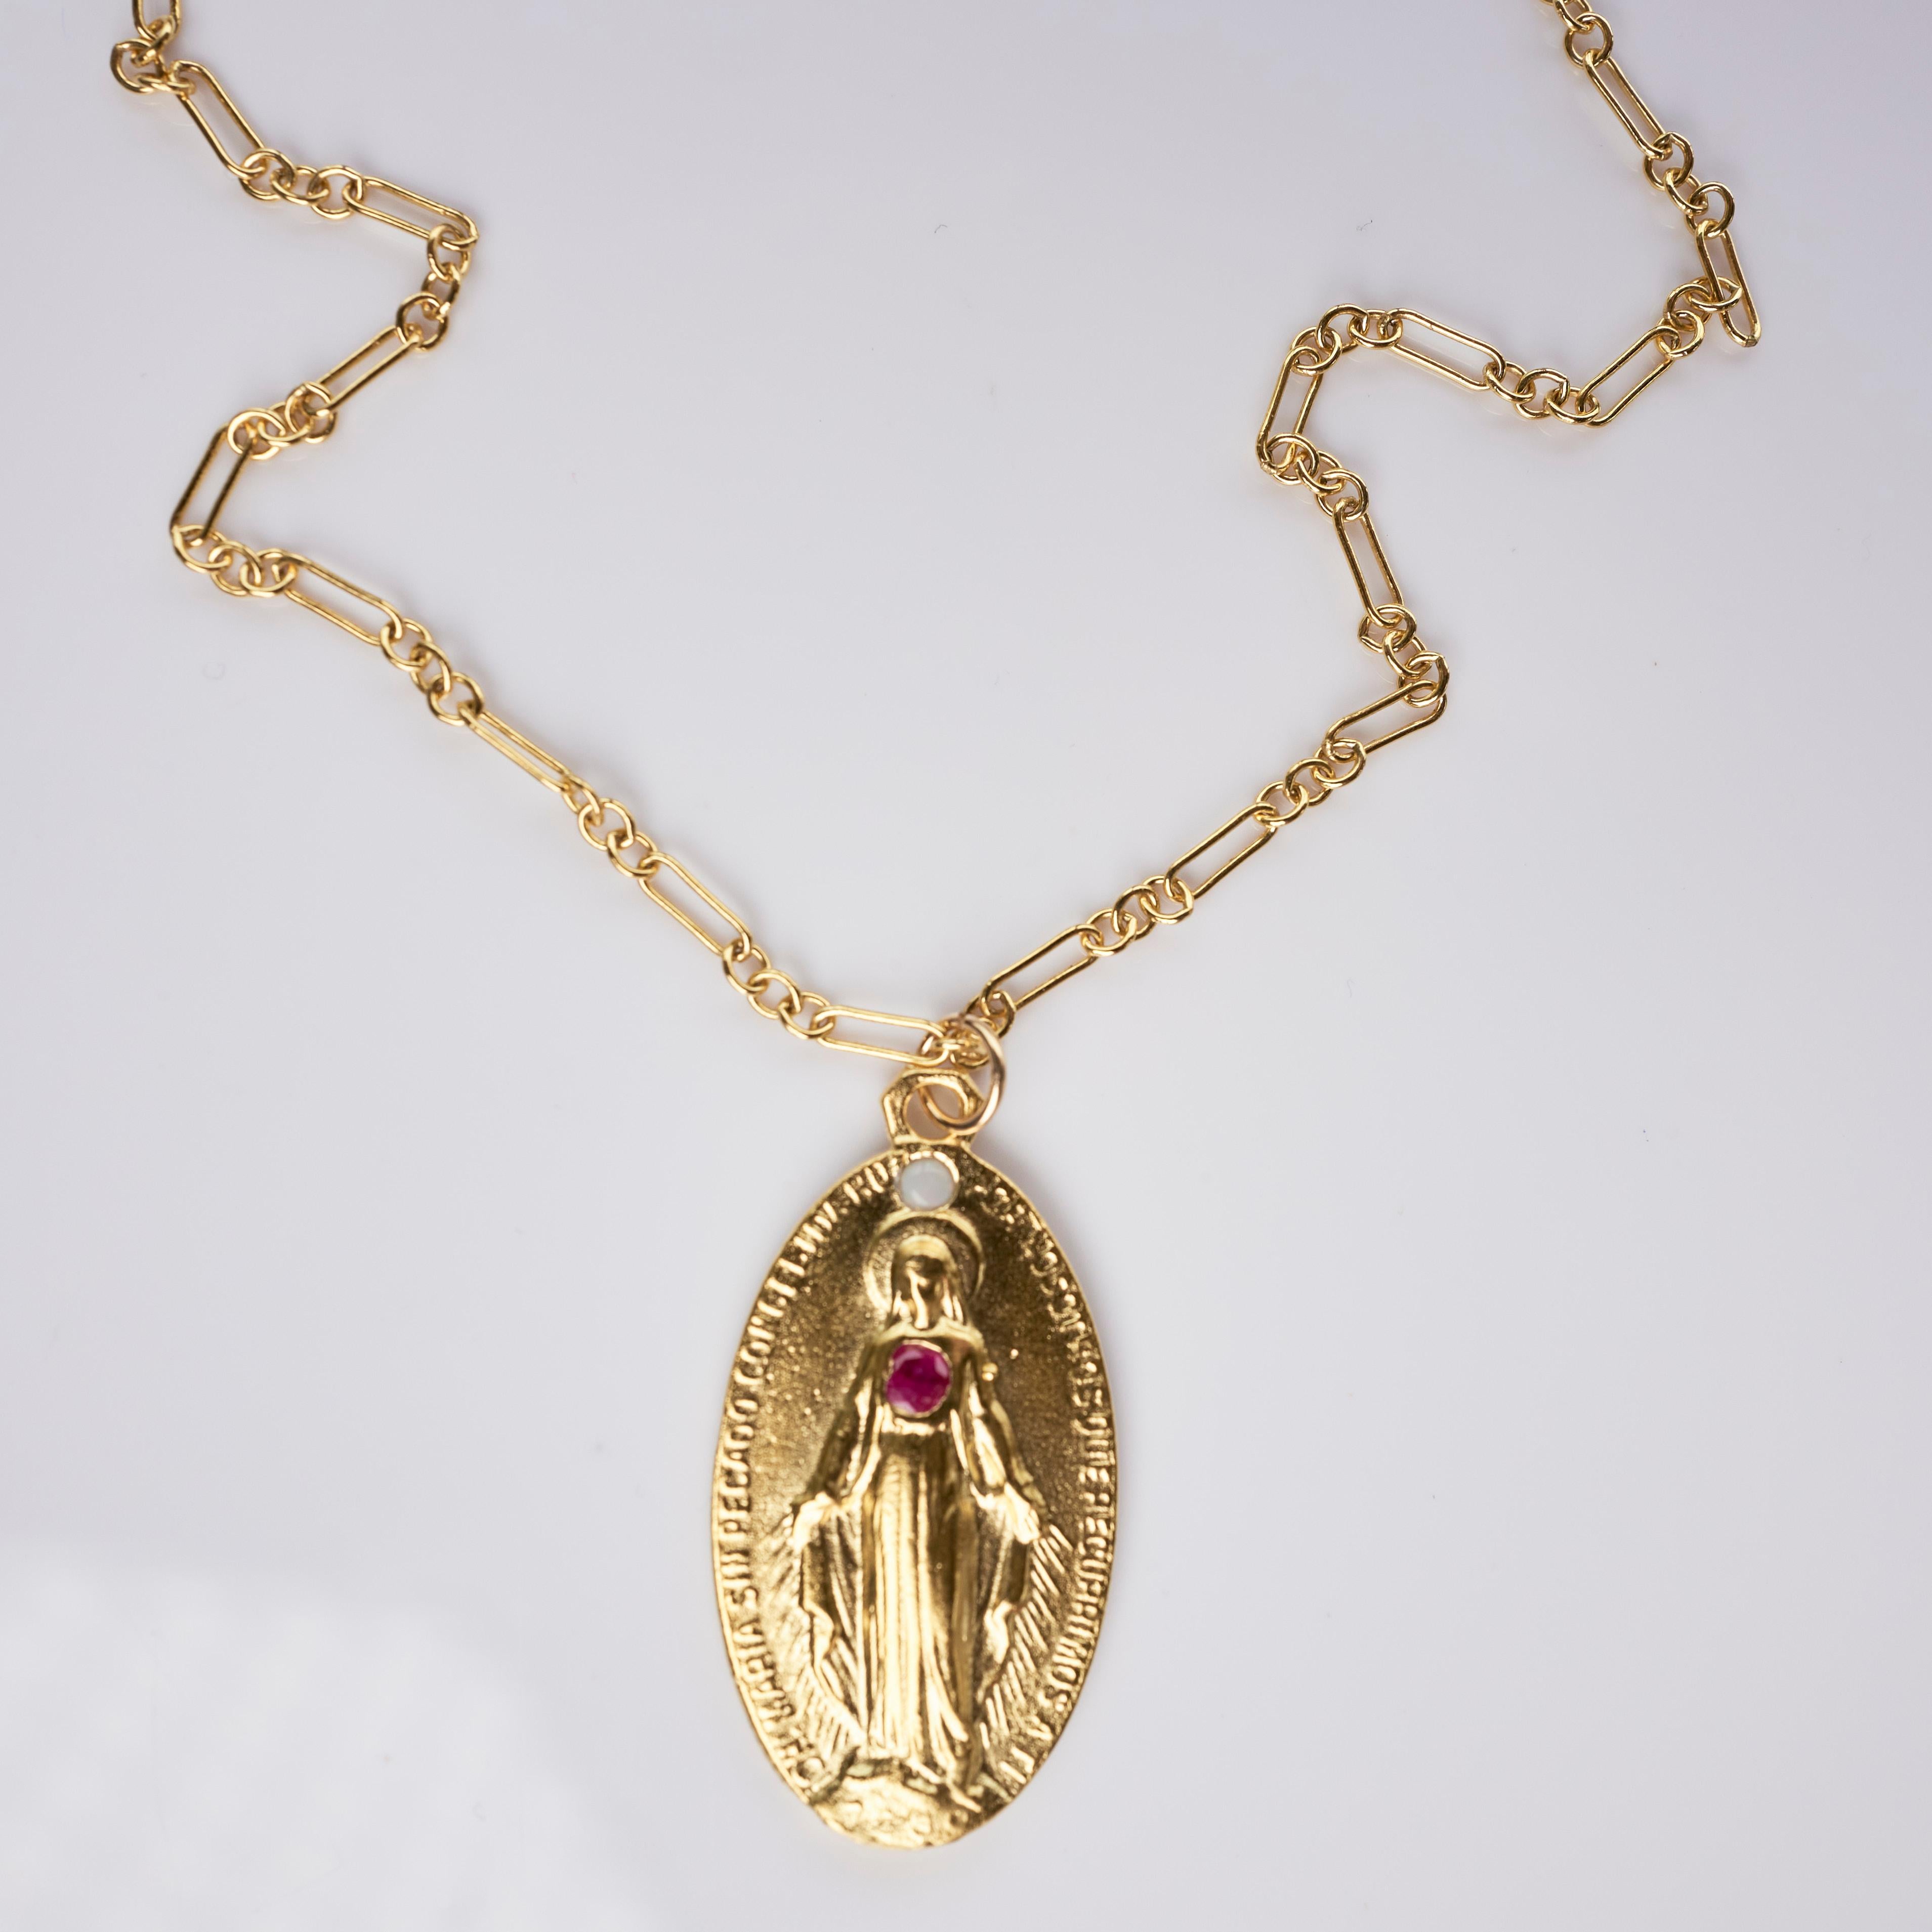 Round Cut Virgin Mary Ruby Opal Medal Chain Necklace J Dauphin For Sale